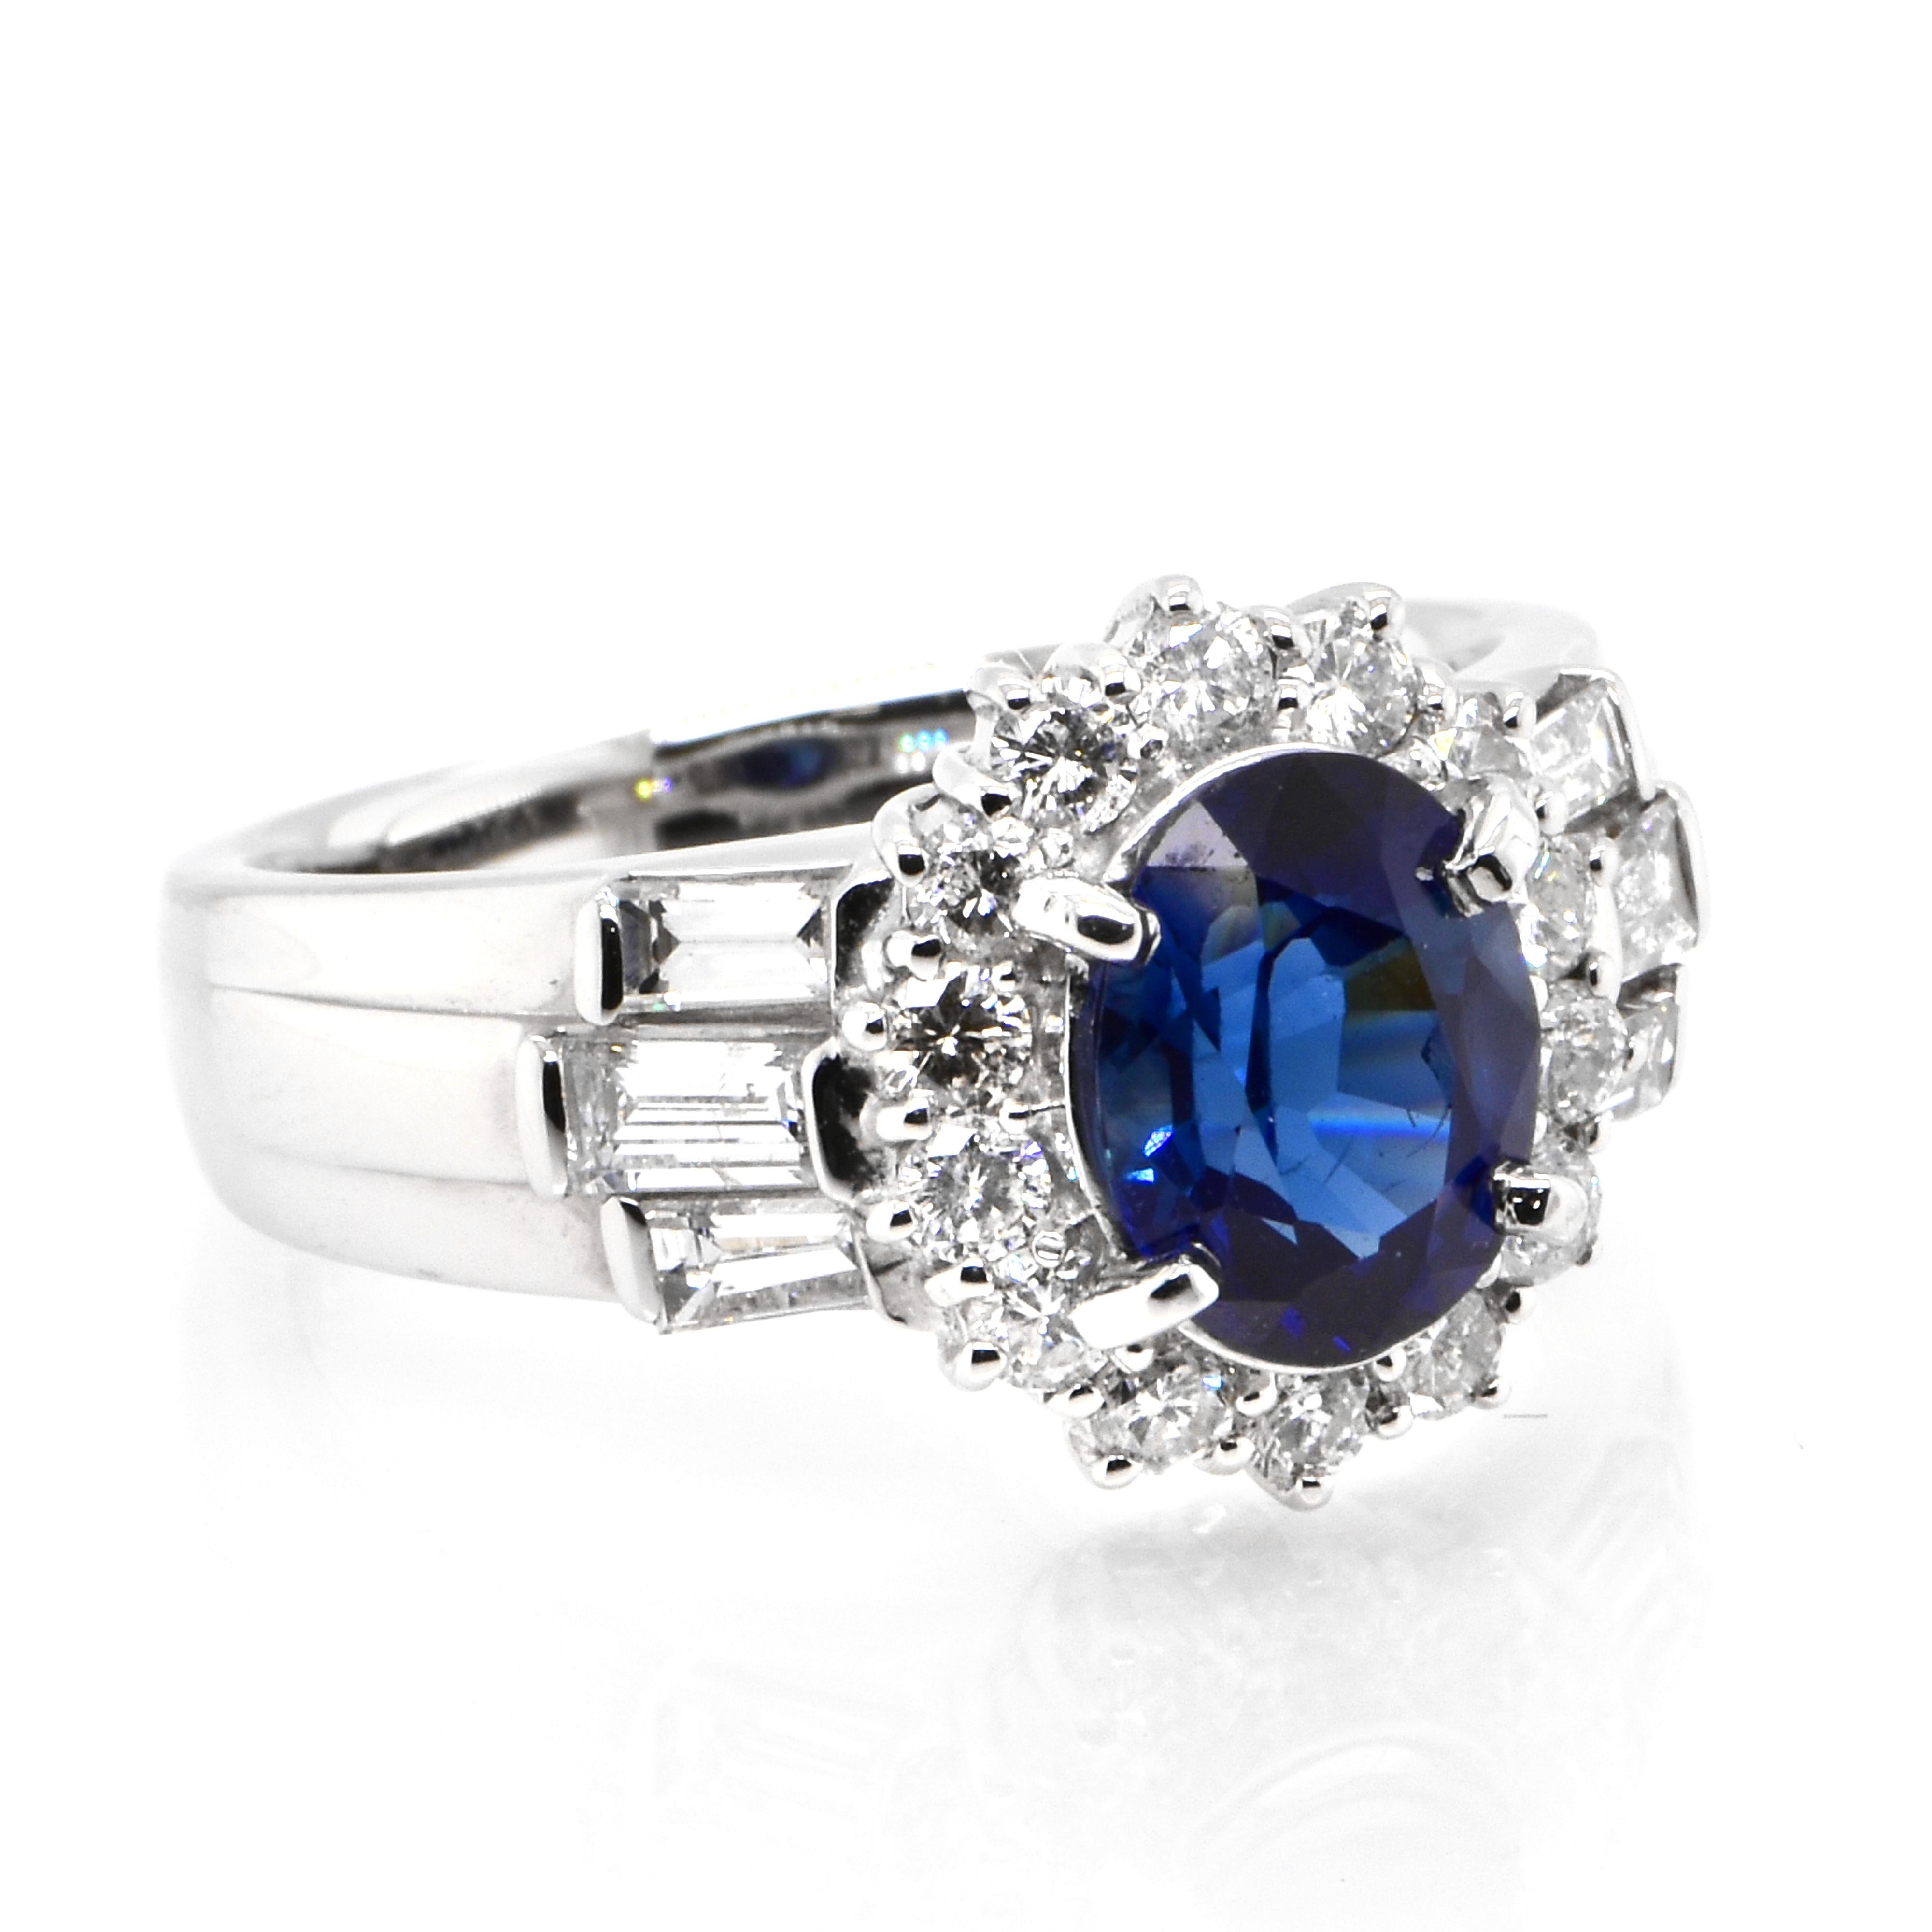 Modern 1.52 Carat Natural Royal Blue Color Sapphire and Diamond Ring Made in Platinum For Sale